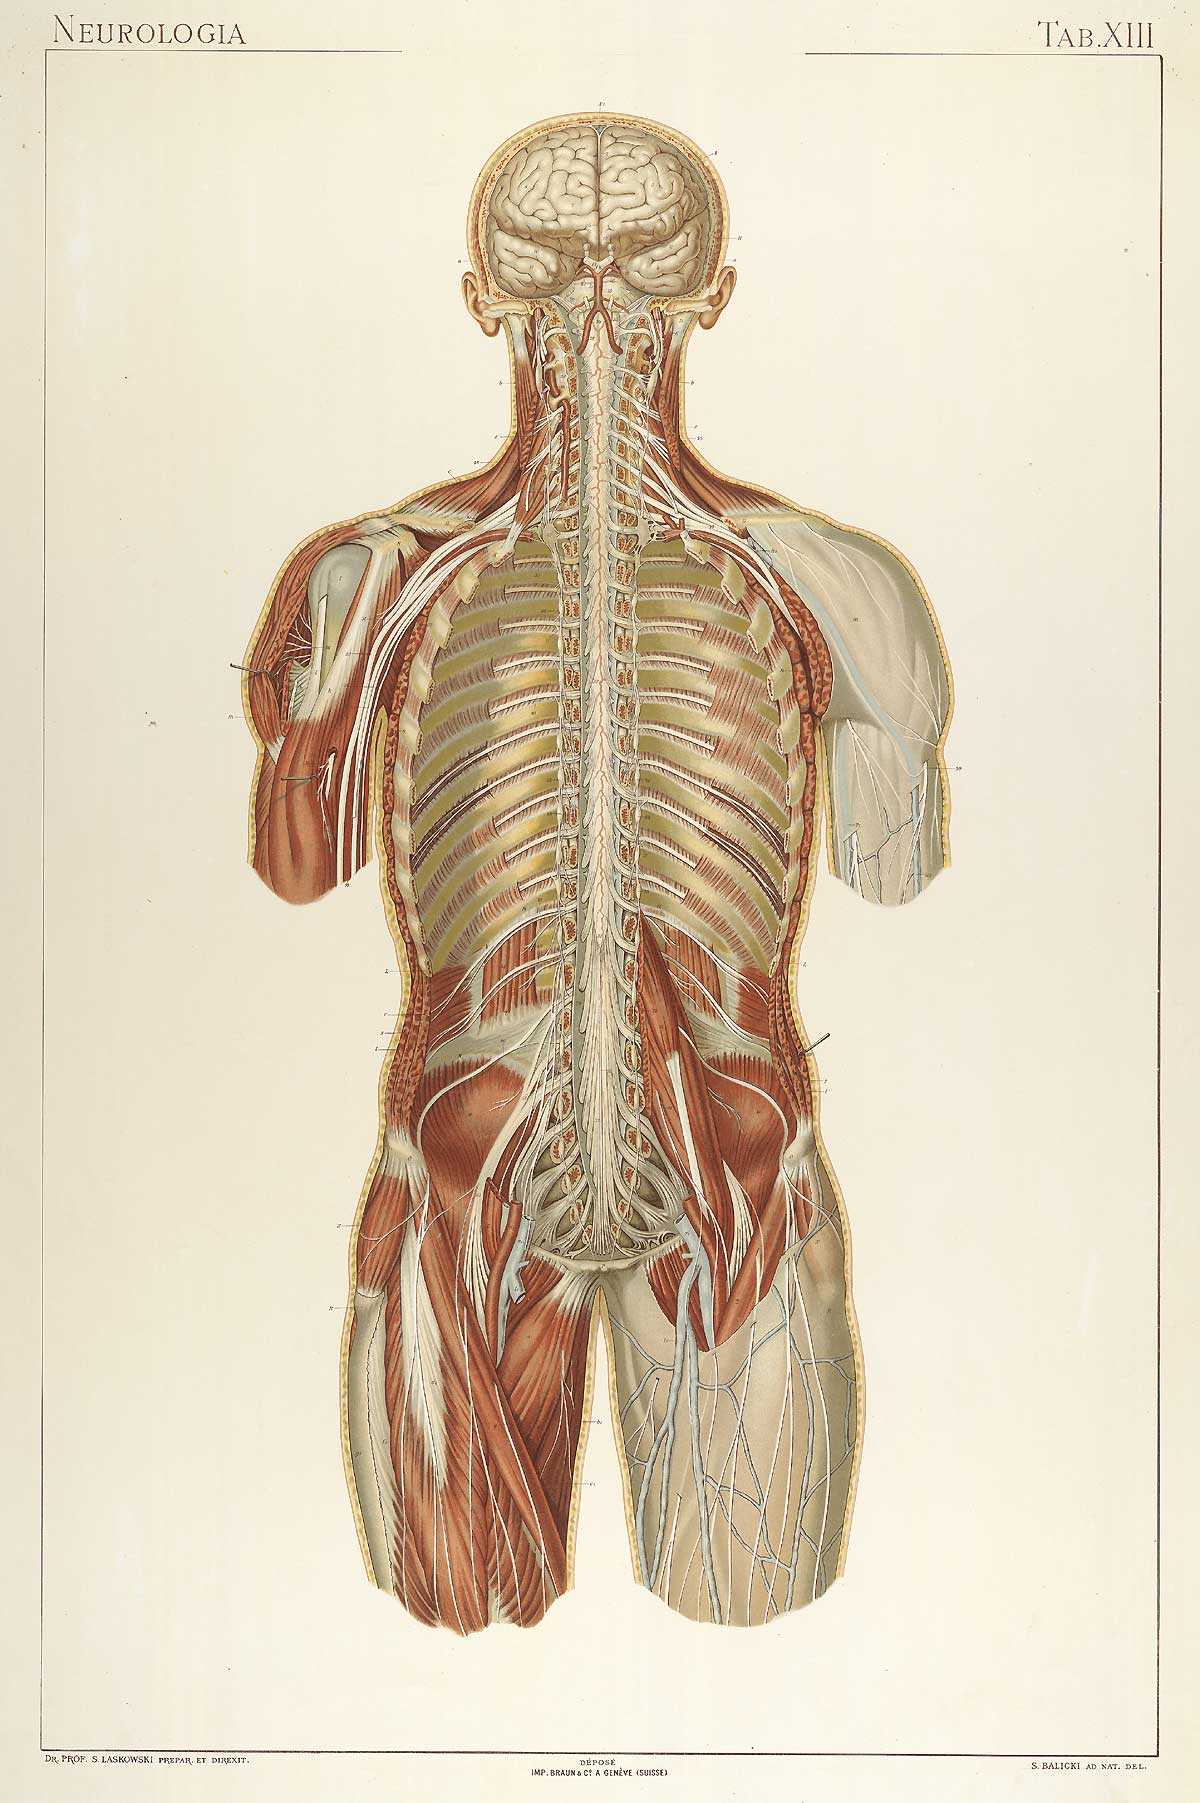 Plate 13 of Sigismond Laskowski's Anatomie normale du corps humain, featuring an posterior view of the nervous system of the body from head to mid-thigh.